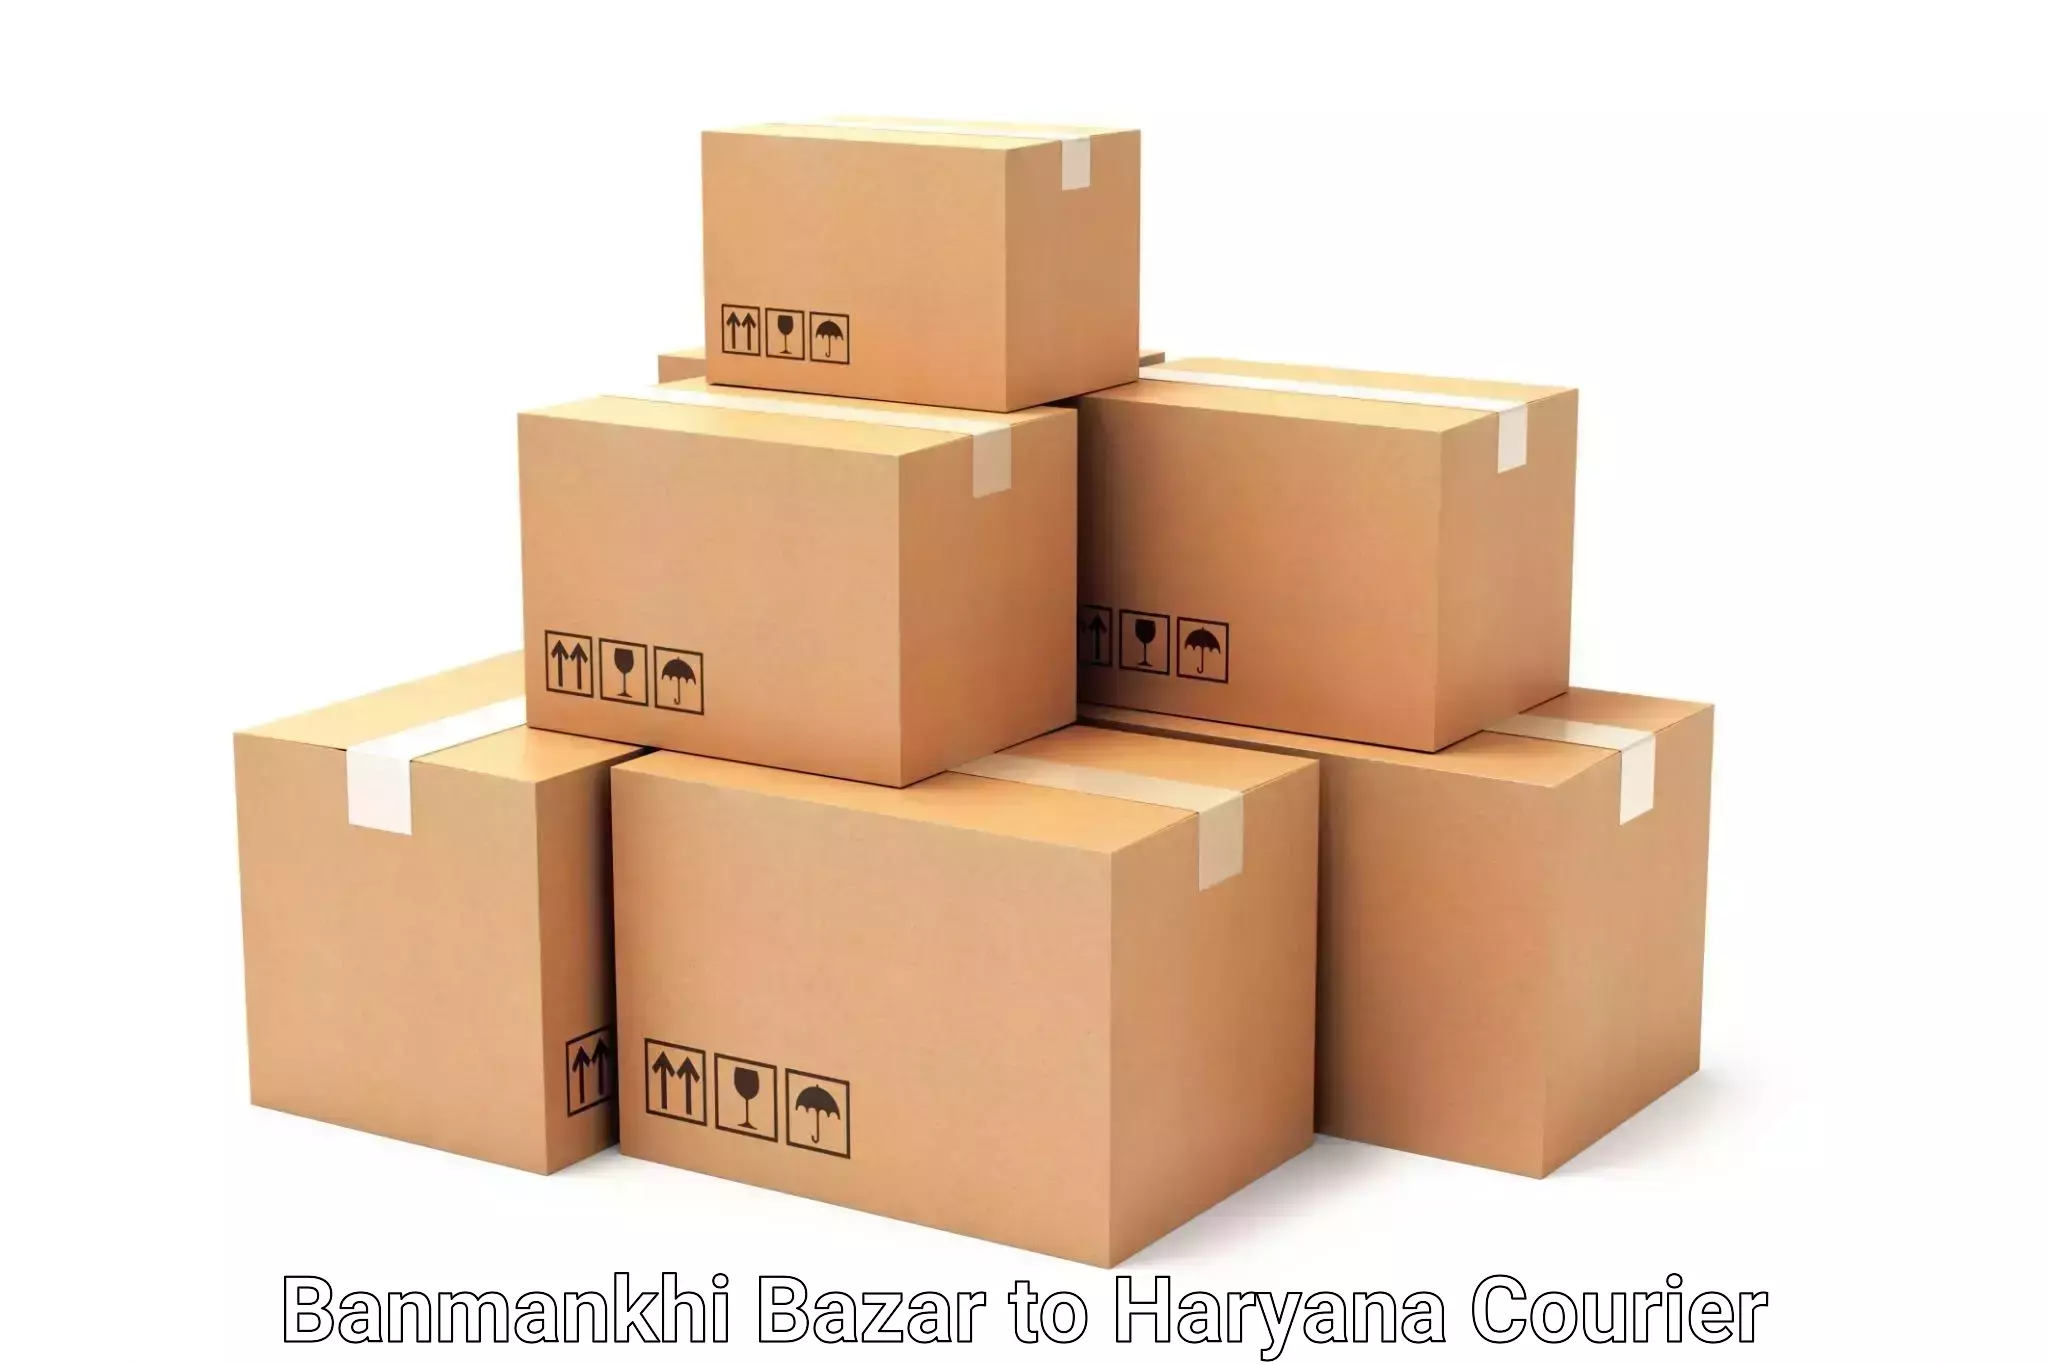 Luggage shipping efficiency in Banmankhi Bazar to NCR Haryana